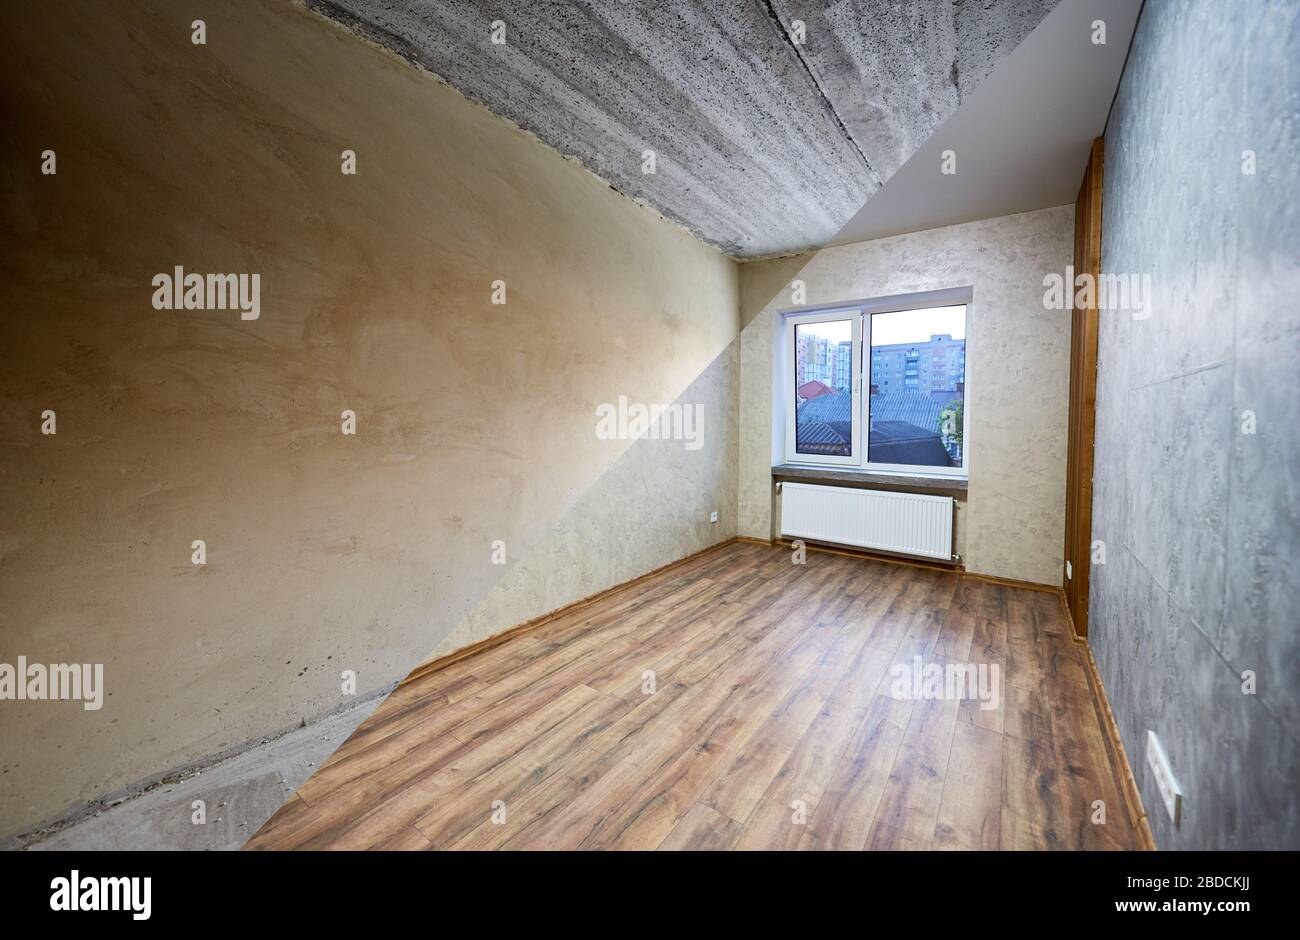 Room in apartment before and after renovation works, new window and a radiator, grey wallpapers and wood textured laminate, renovation concept Stock Photo